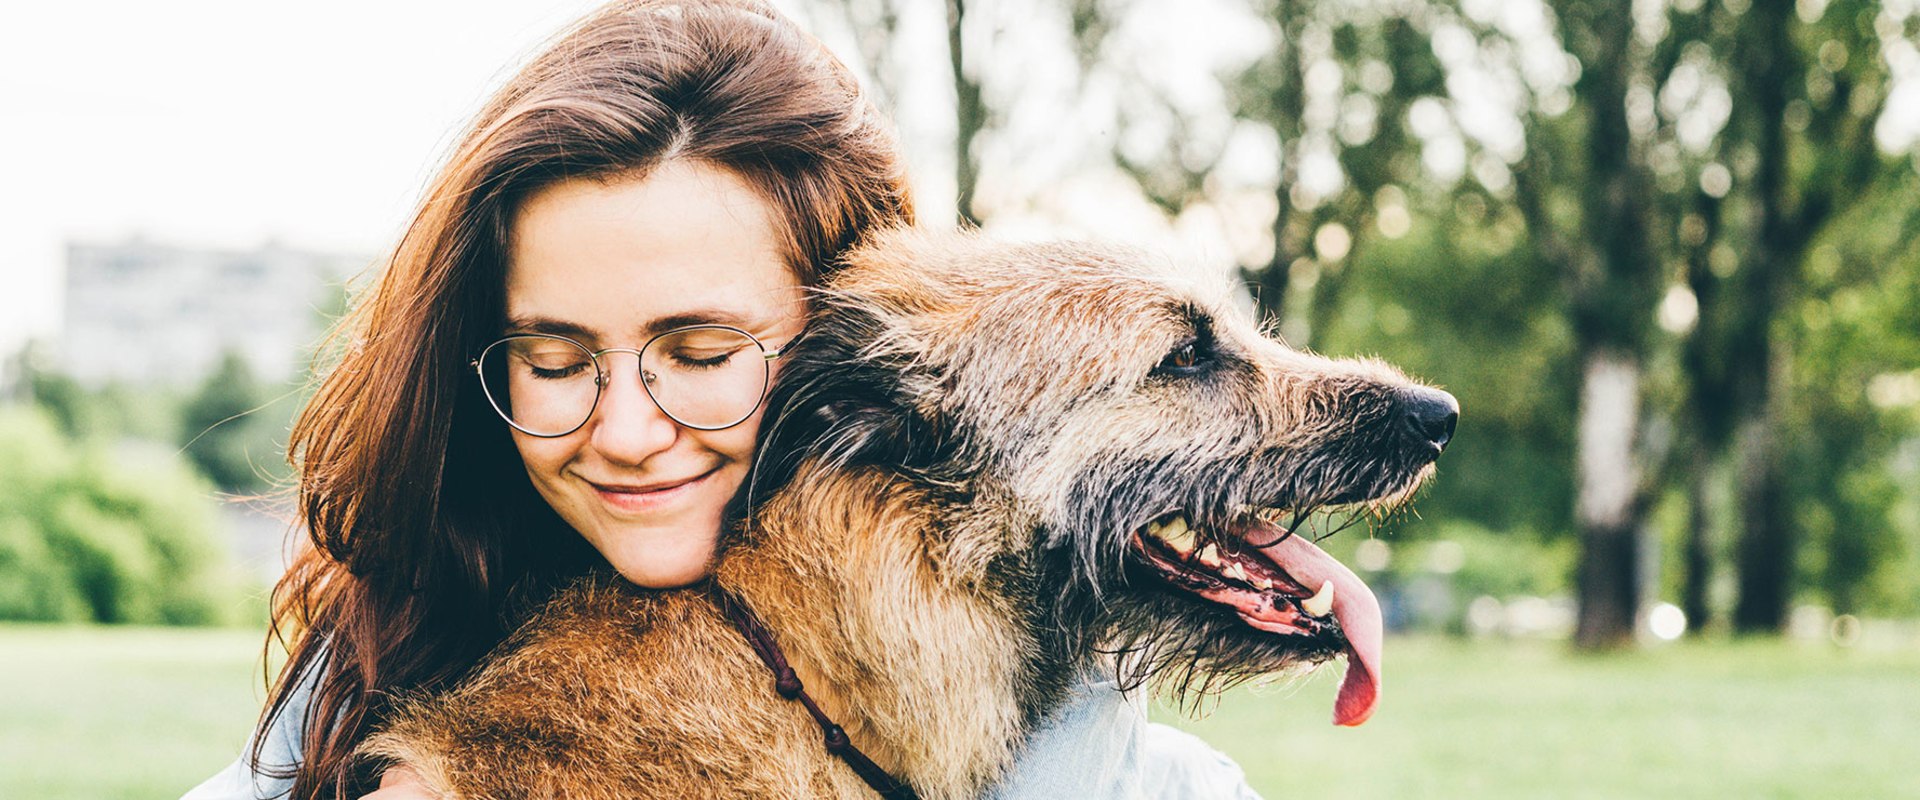 Senior Dog Care: What Every Dog Owner Should Know